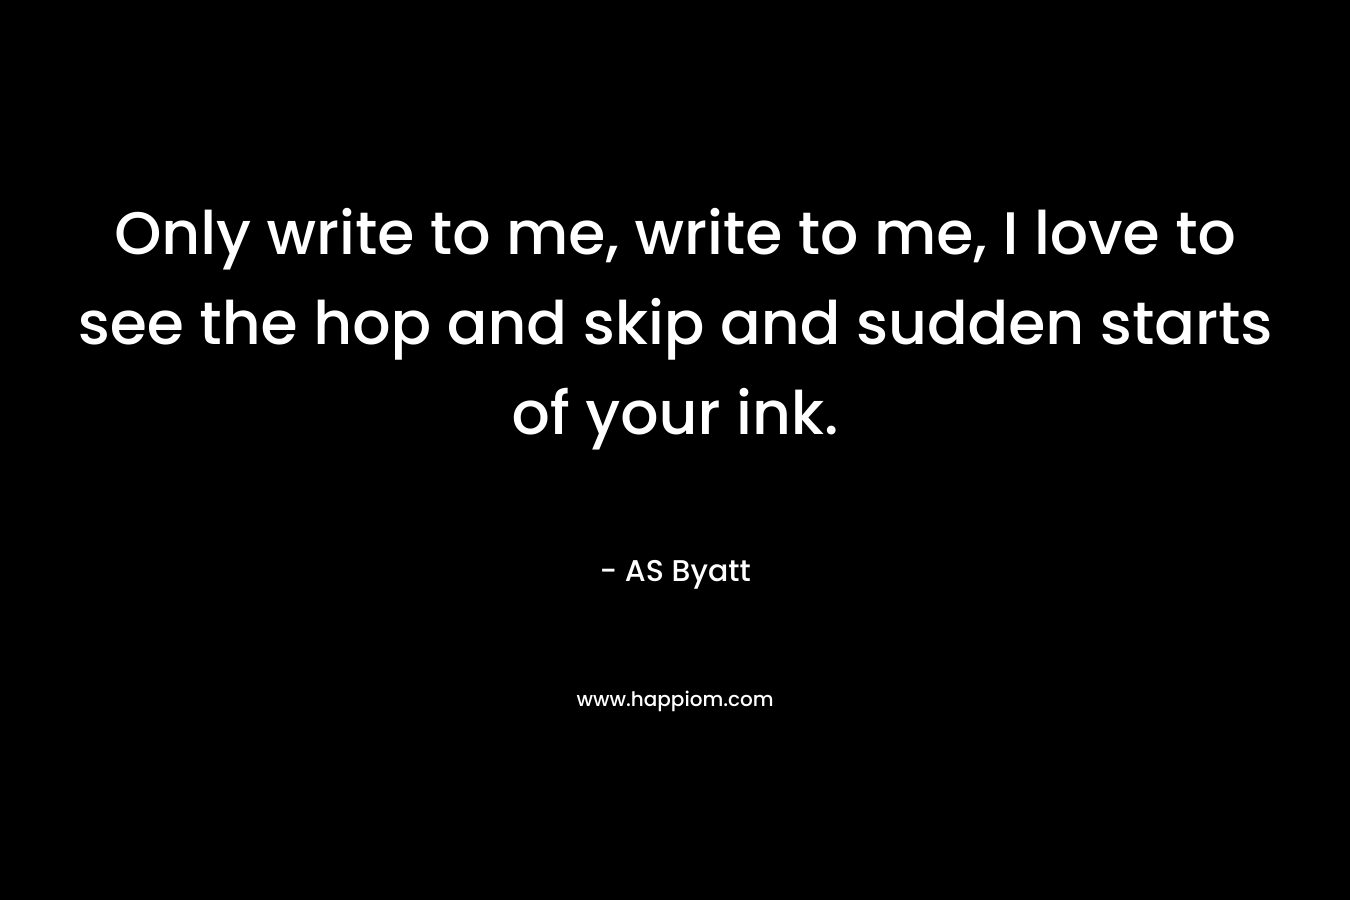 Only write to me, write to me, I love to see the hop and skip and sudden starts of your ink.